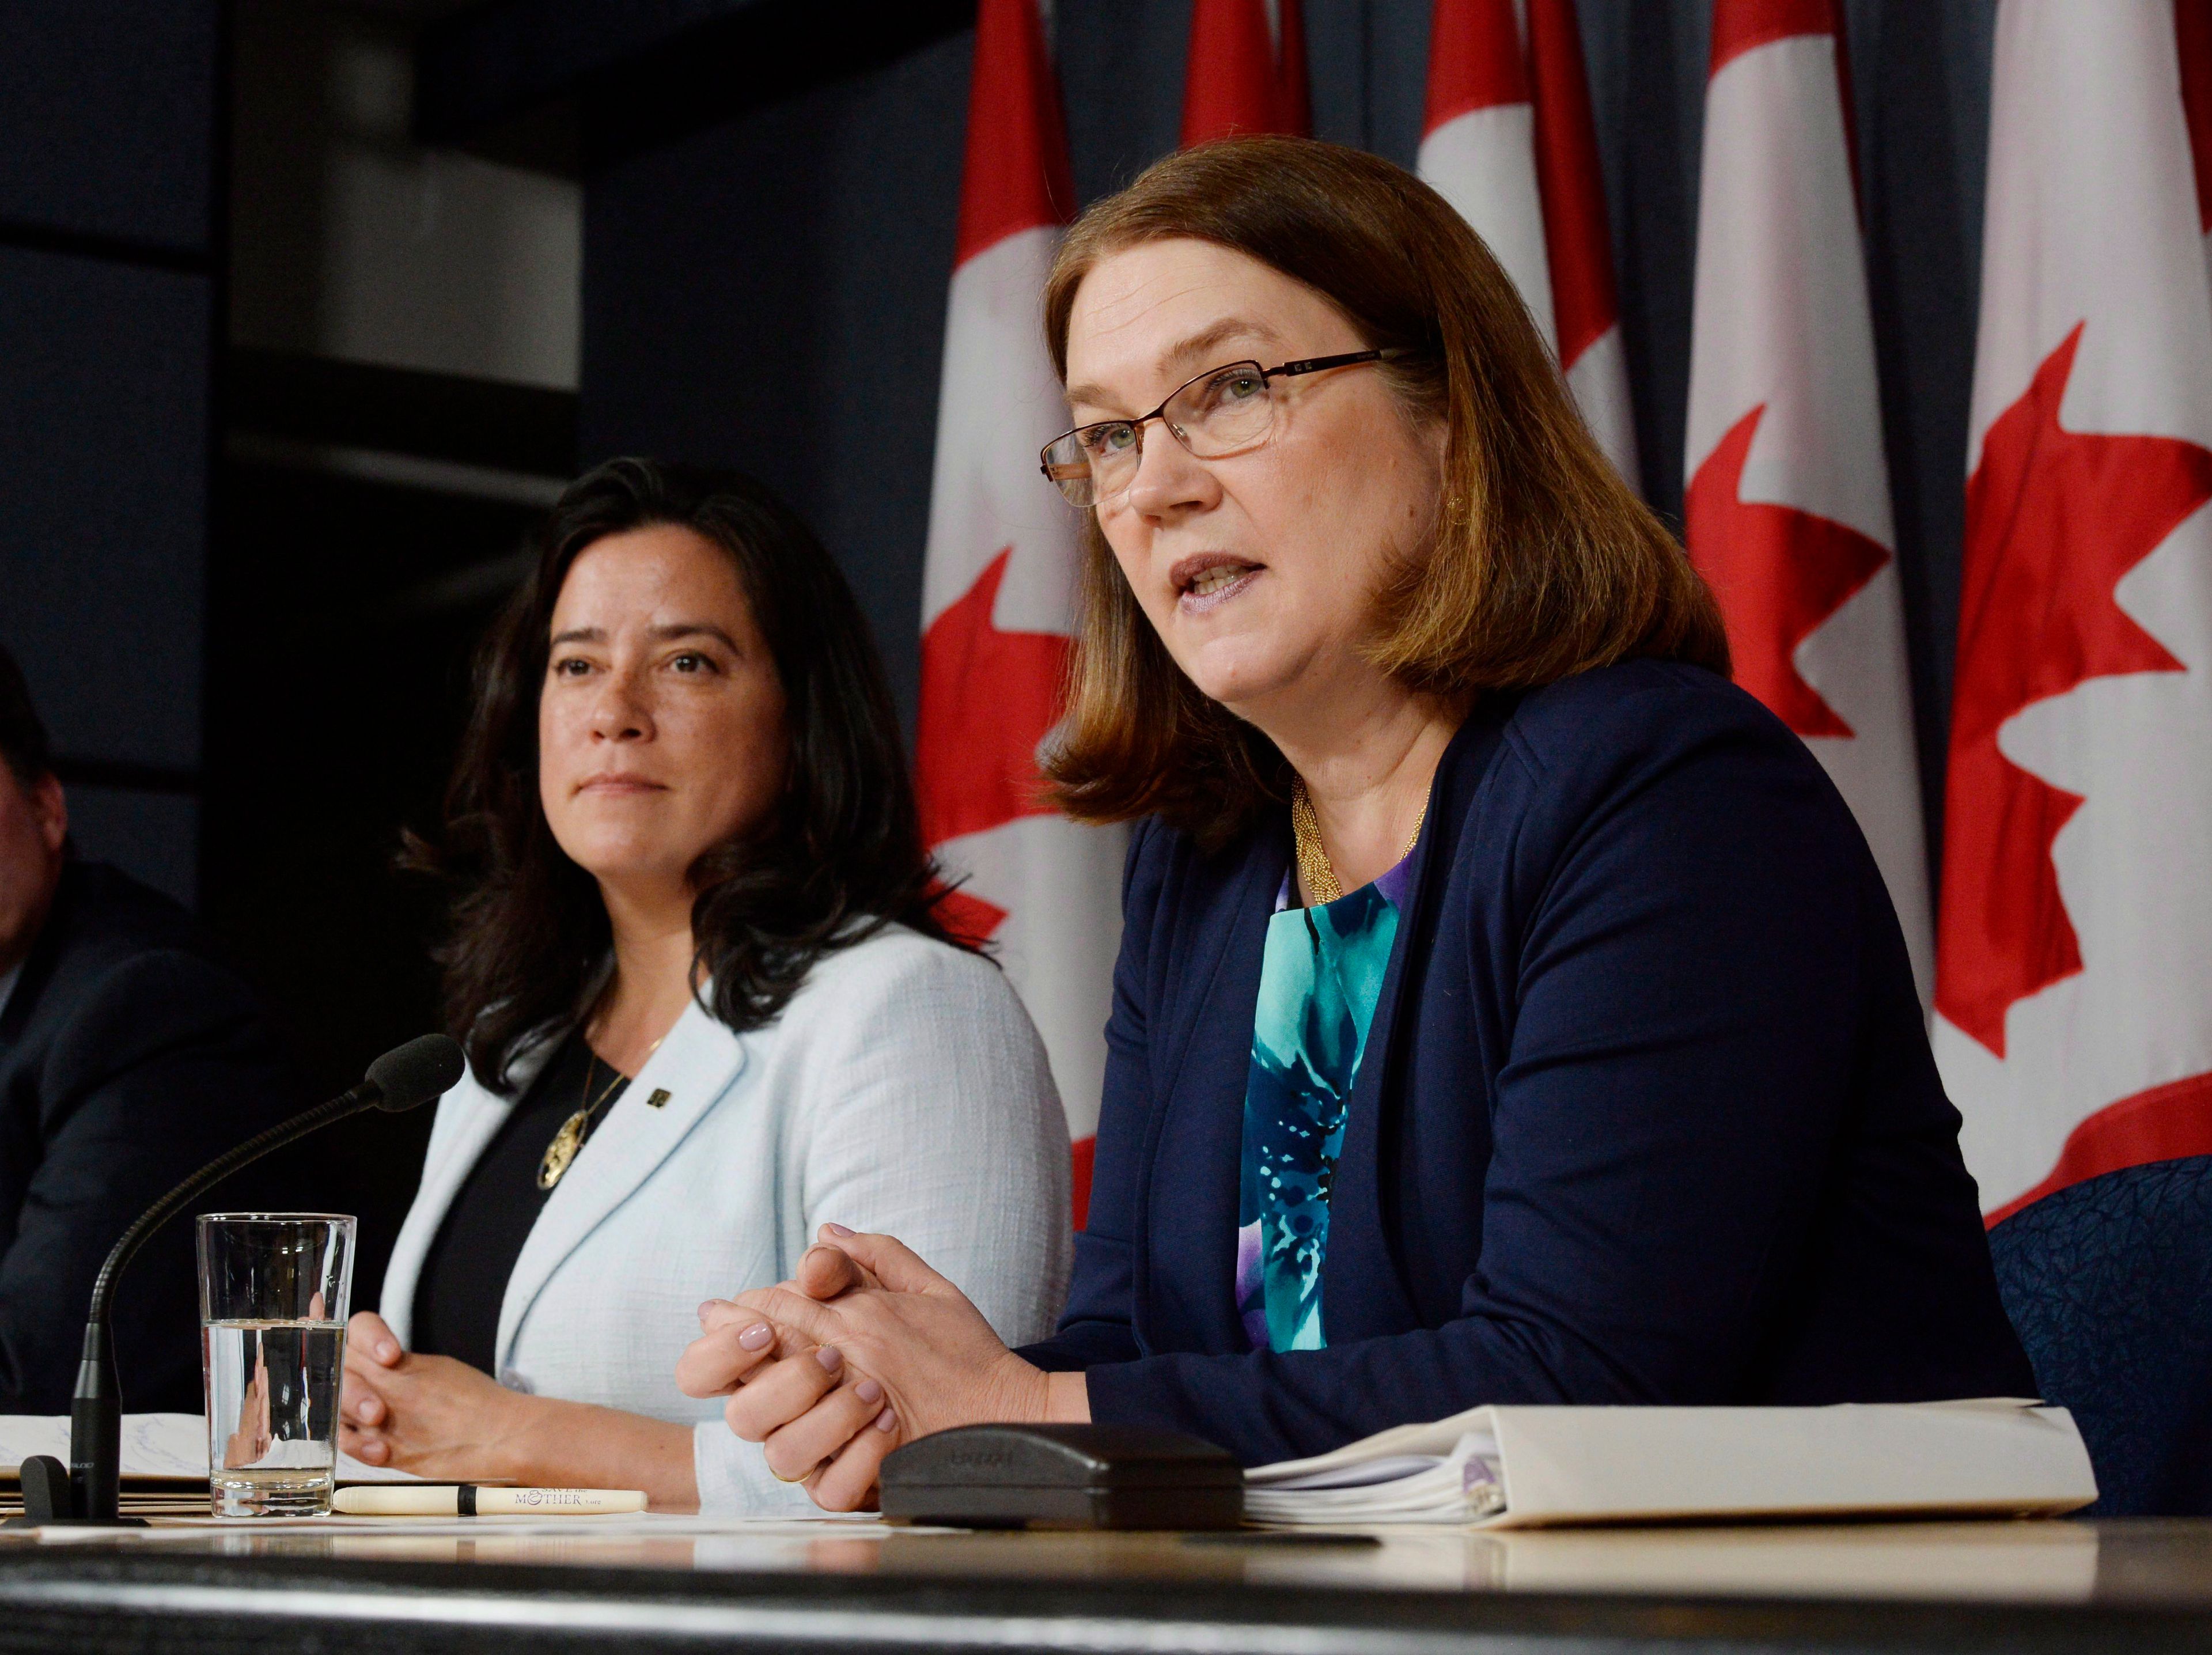 MEDICAL-ASSISTANCE-IN-DYING-PHILPOTT-WILSON-RAYBOULD-FEB3